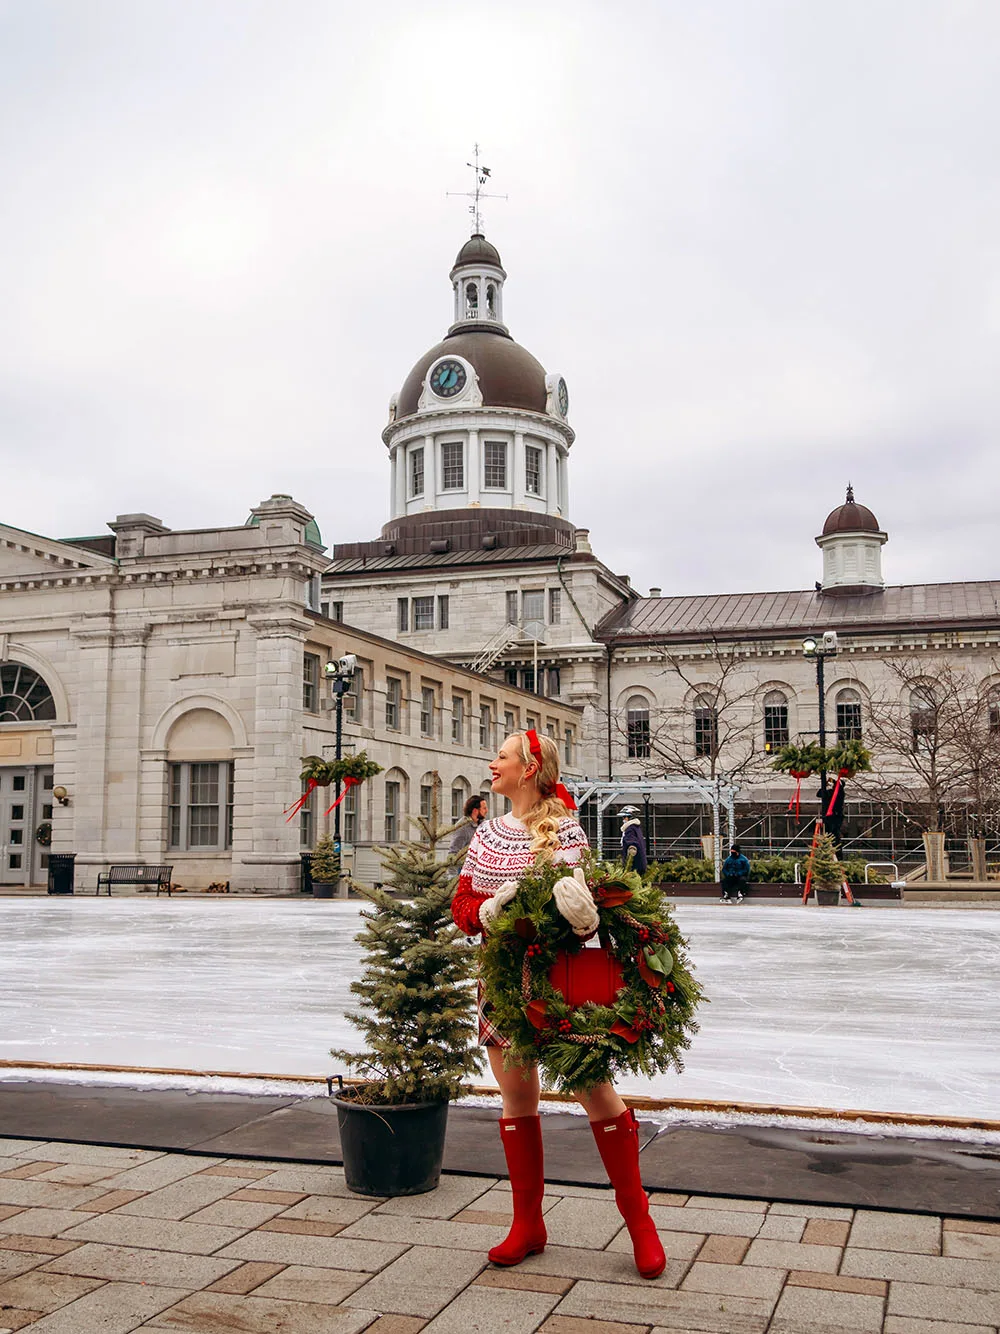 Planning a trip to Kingston soon with the goal of taking some amazing pictures while you're there? This guide to the most instagrammable places in Kingston Ontario is for you! From the gorgeous old architecture and historic buildings, European influence you’ll find all lover, and the incredibly unique alleys and cafes, there’s more than enough places to snap your next instagram photo. If you’re planning a visit to Kingston soon you definitely don’t want to miss this guide to the best photo spots in Kingston. Pictured here: Kingston's City Hall